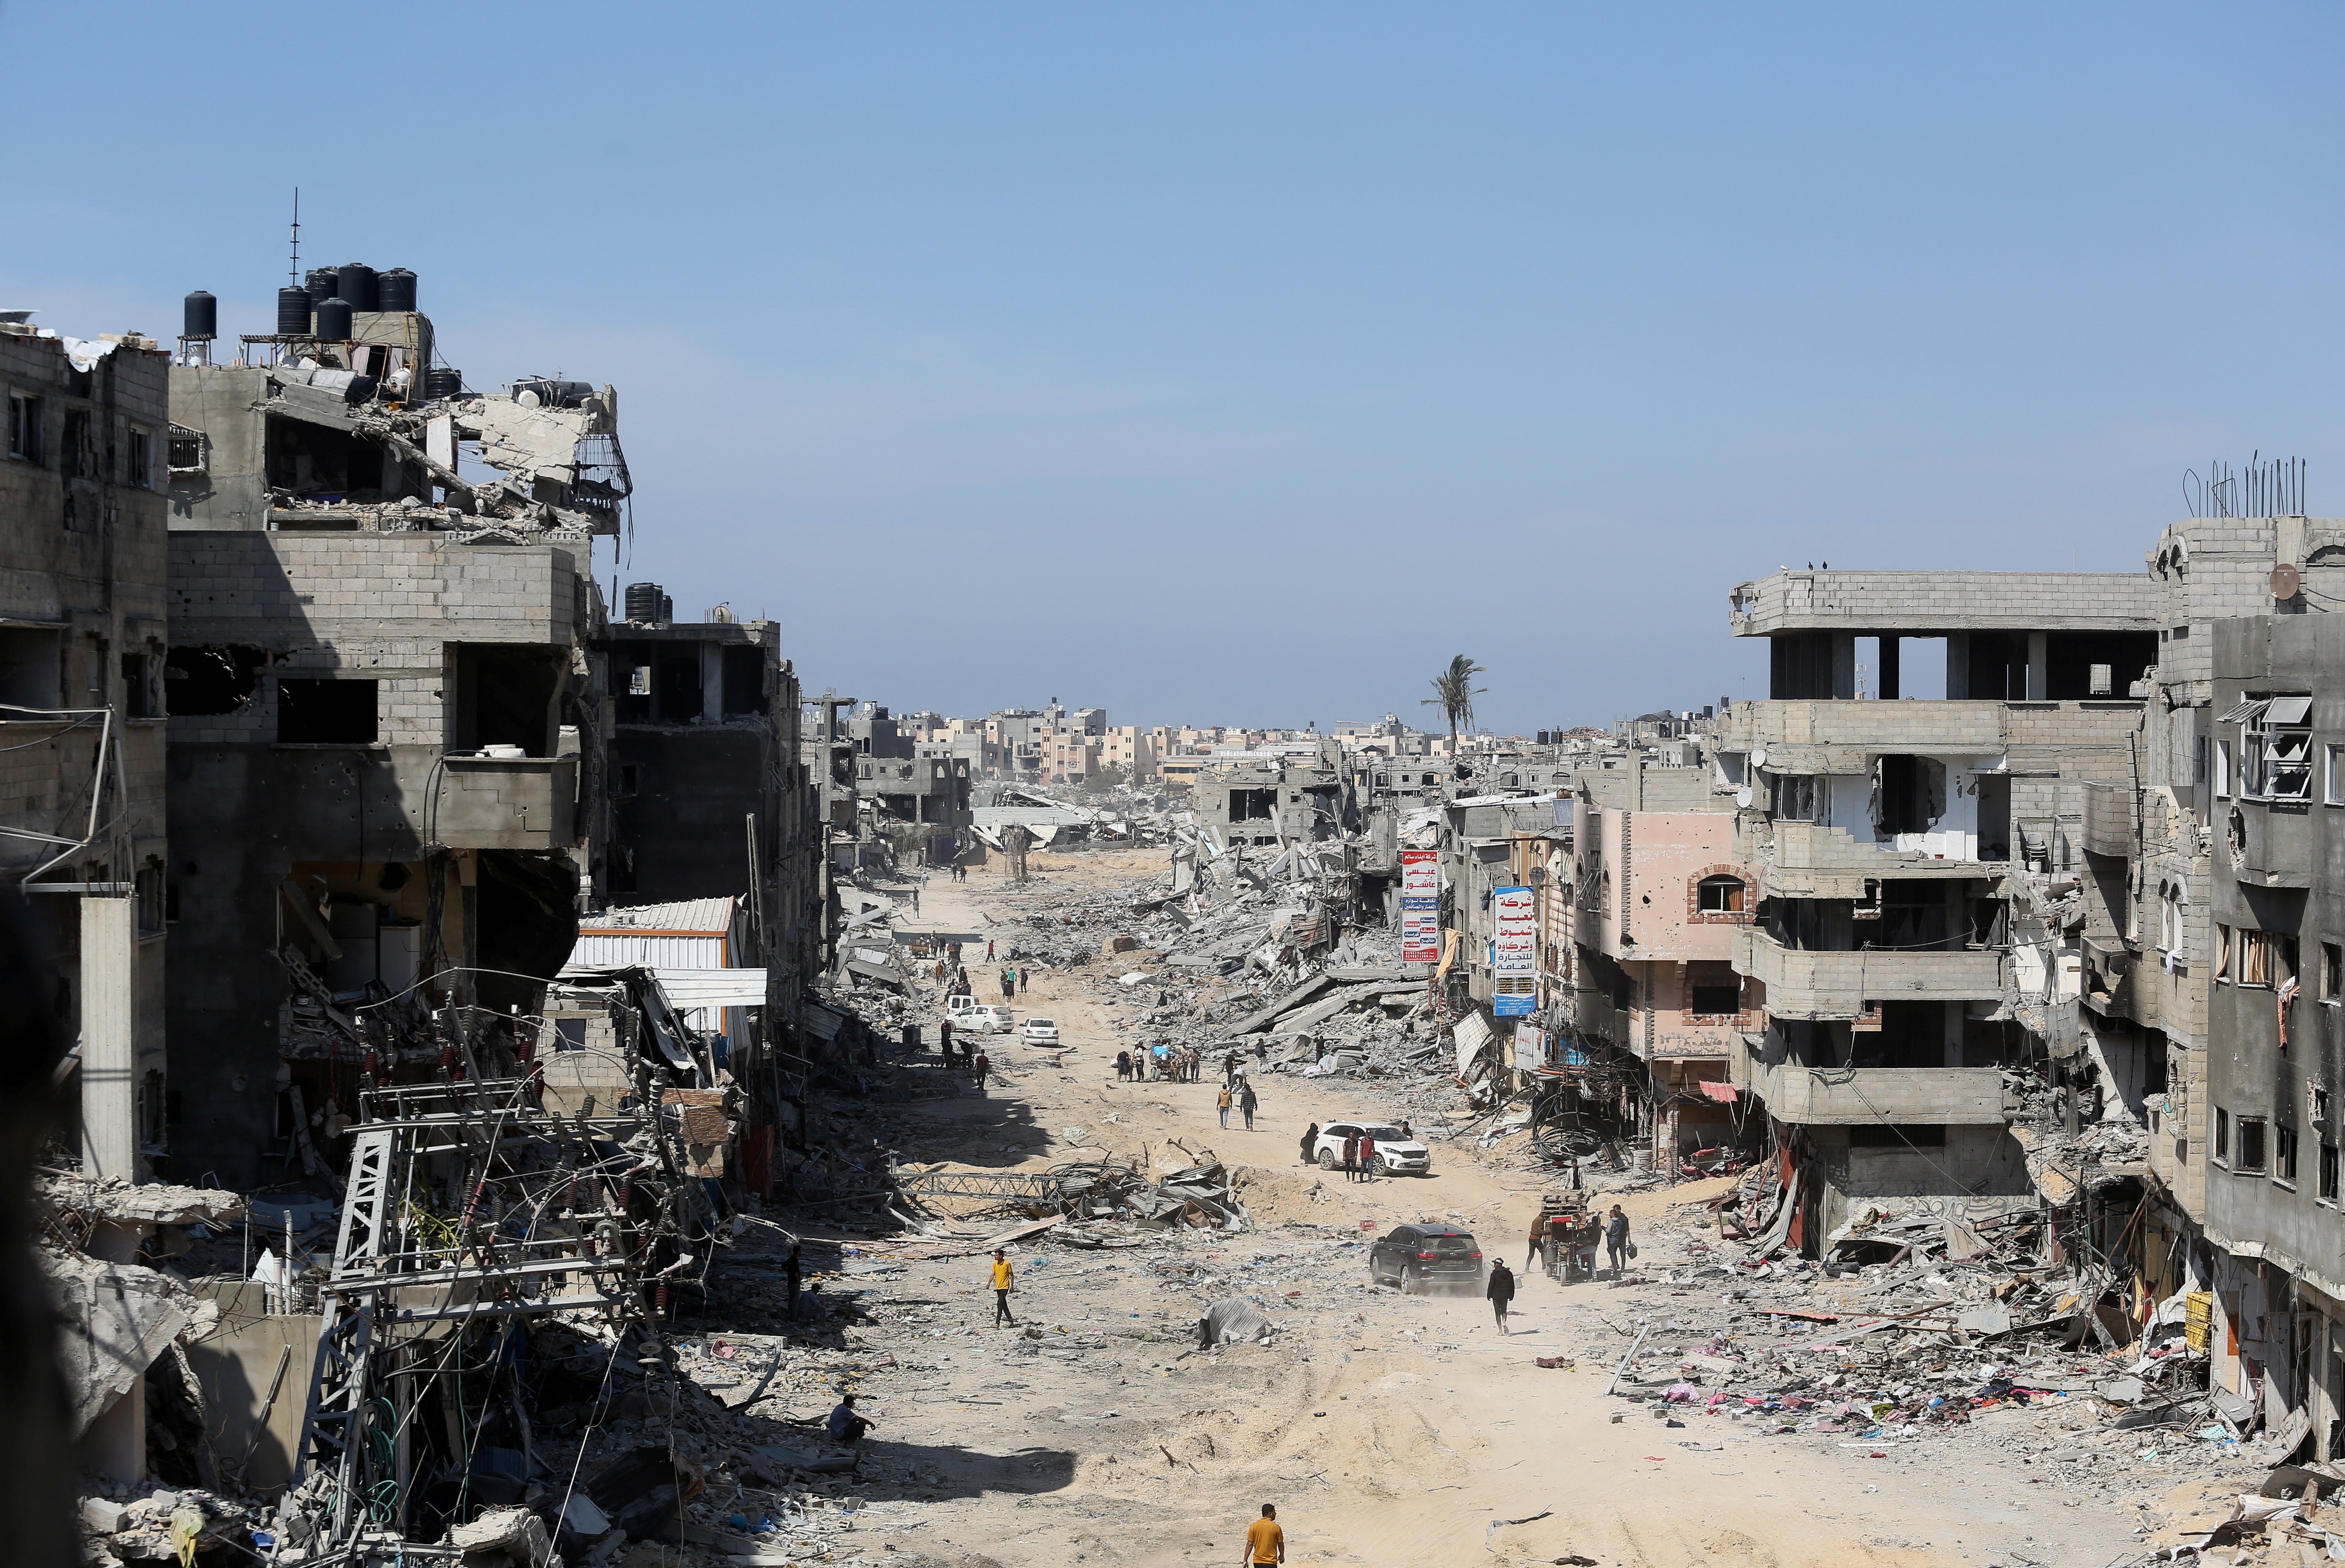 Buildings reduced to rubble in Khan Younis, Gaza, after the Israeli military withdrew most of its ground troops from the region